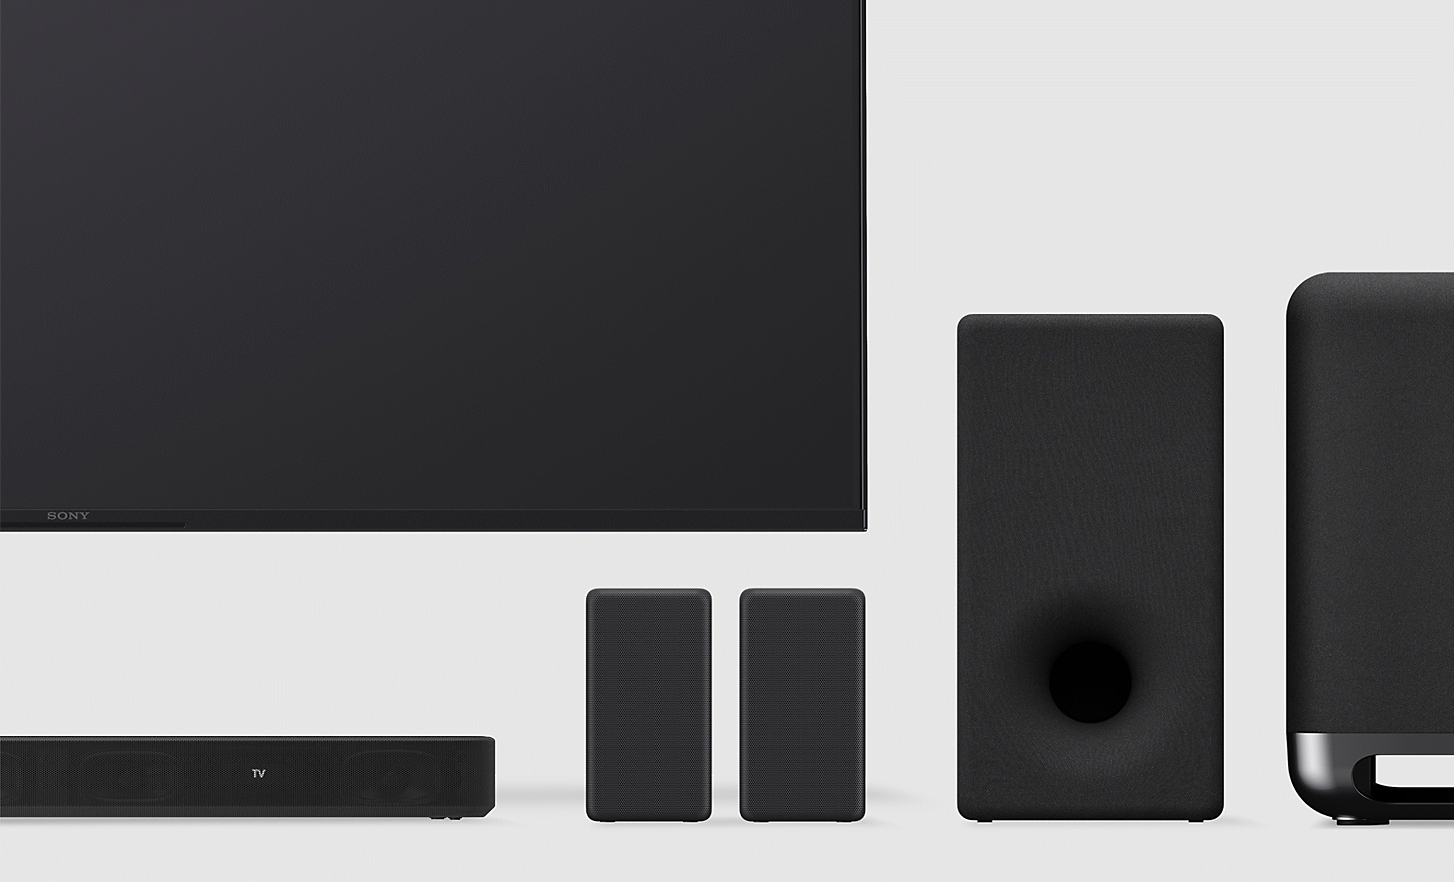 Image of various Sony products including a TV, speakers, subwoofer and soundbar